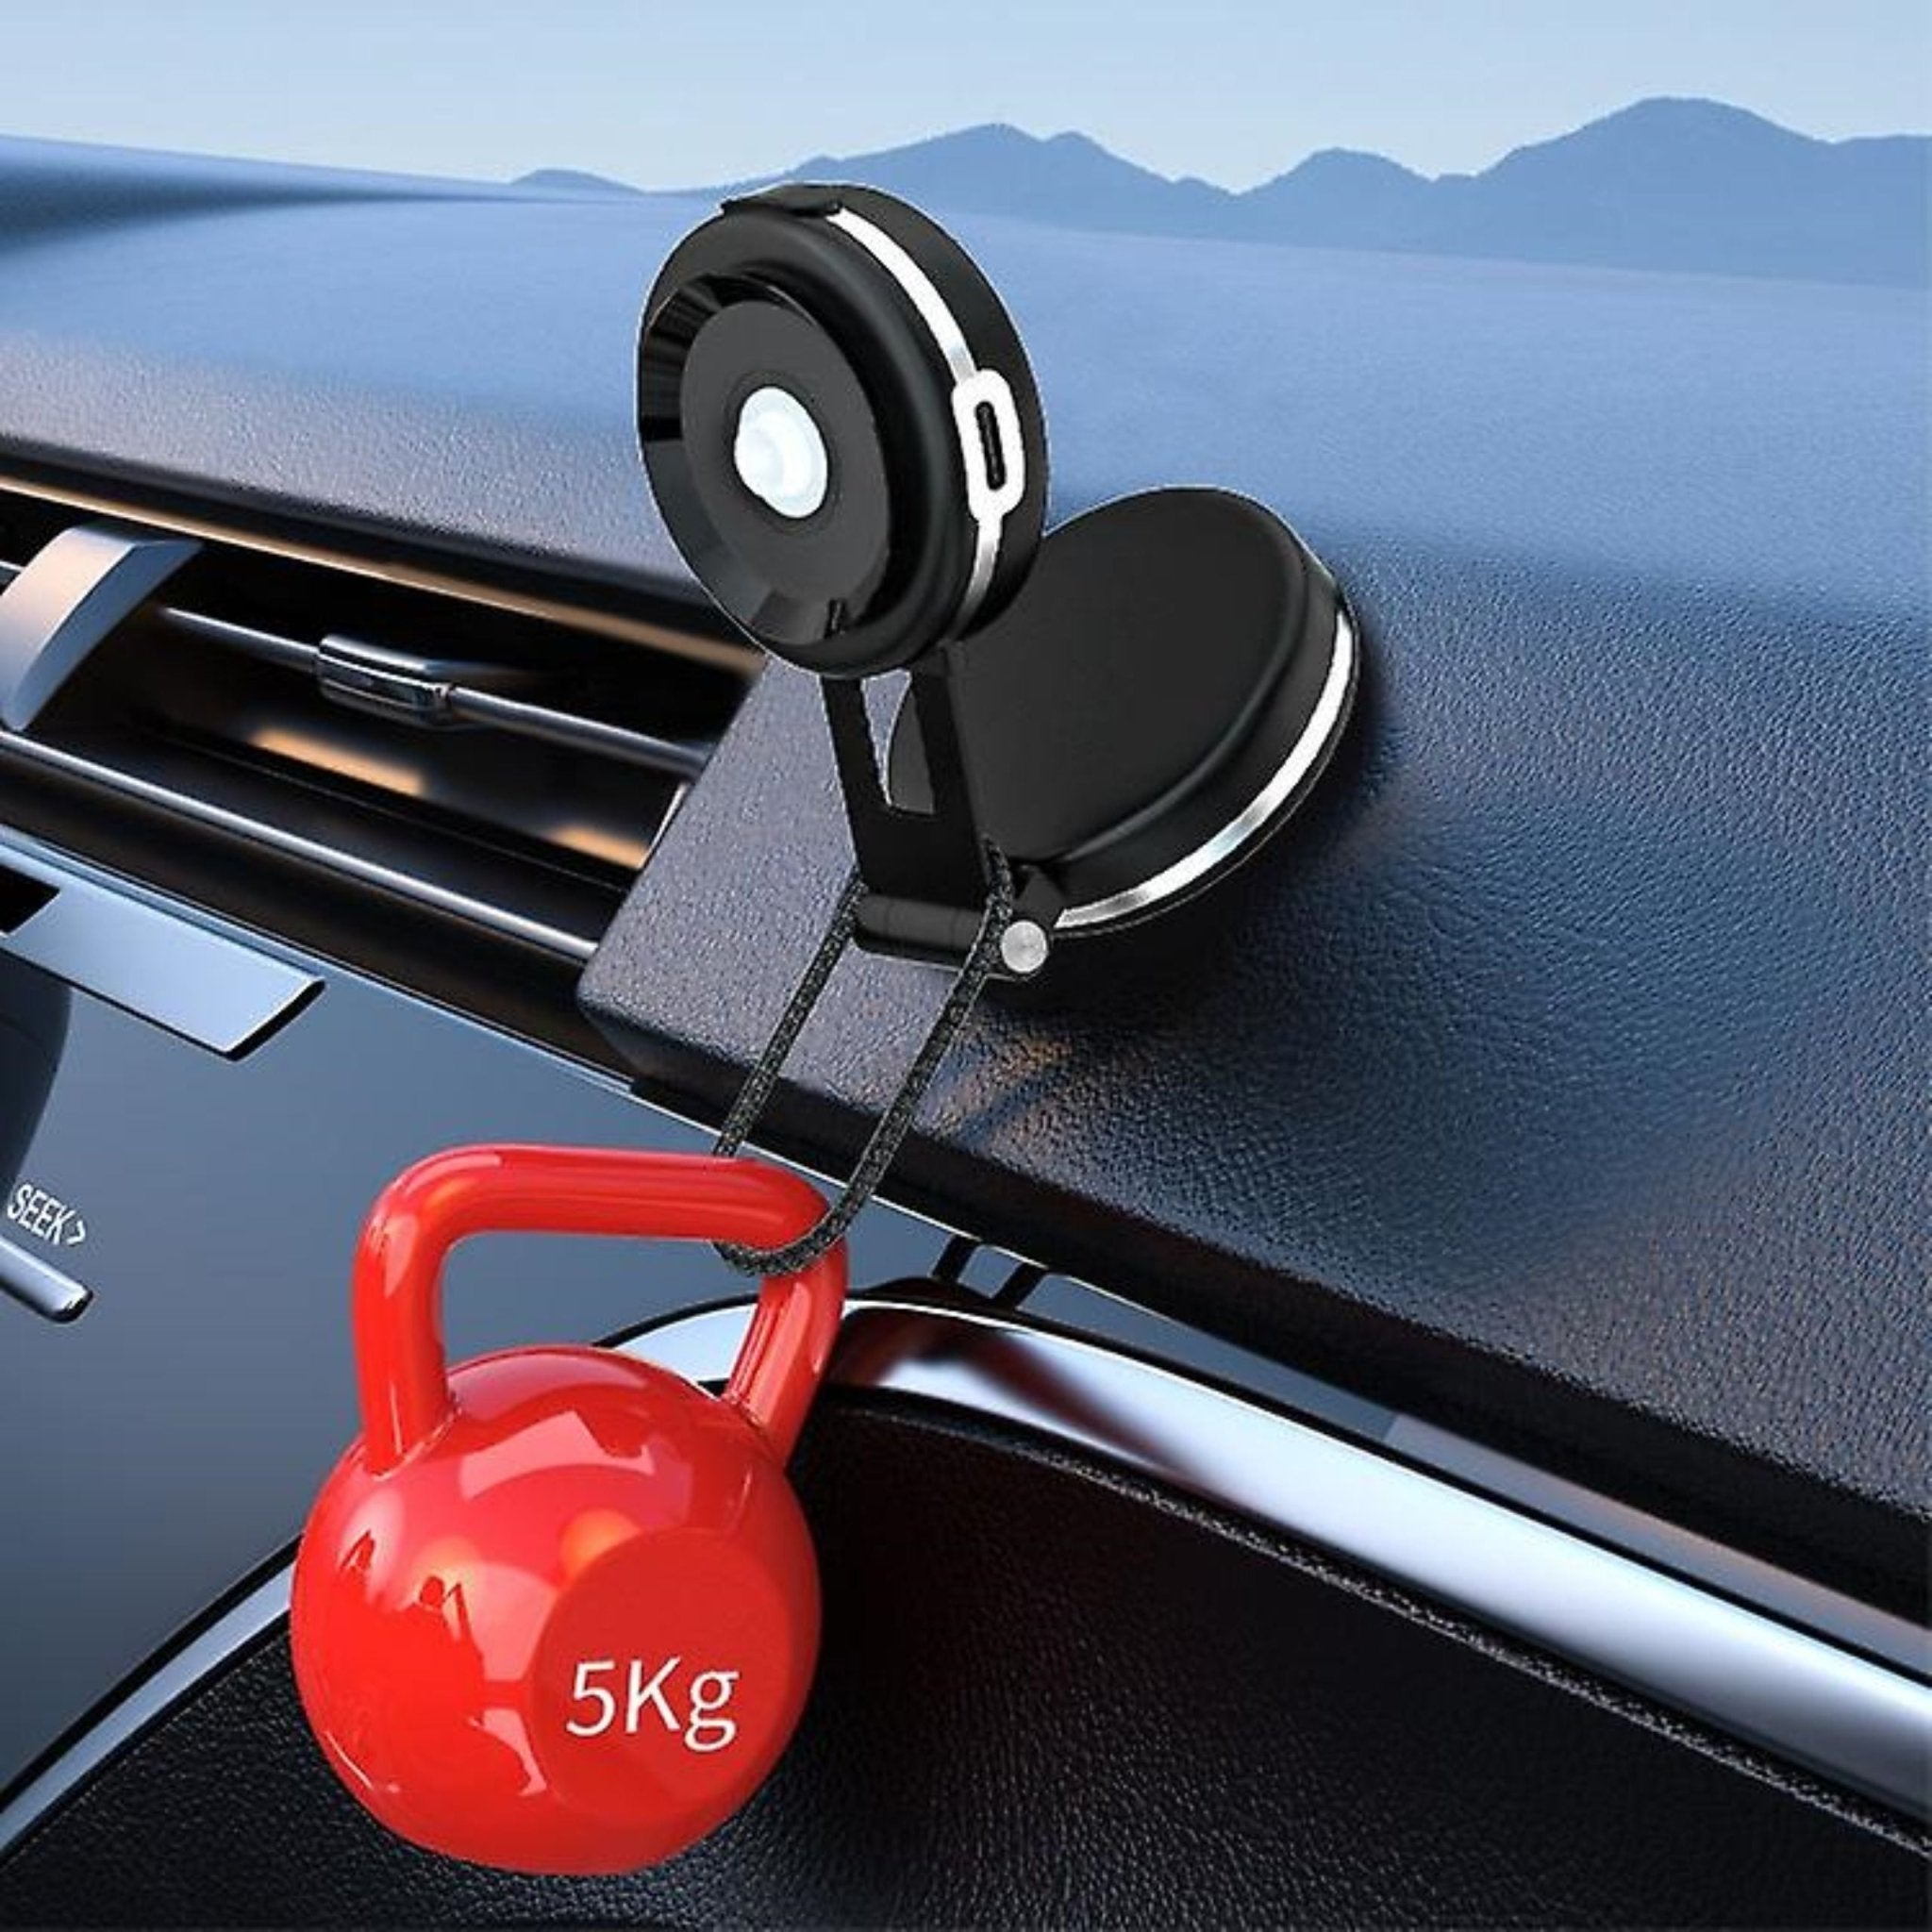 Vacuum Adsorption Rechargeable Car Mount Holder 360 Degree Rotating - Black